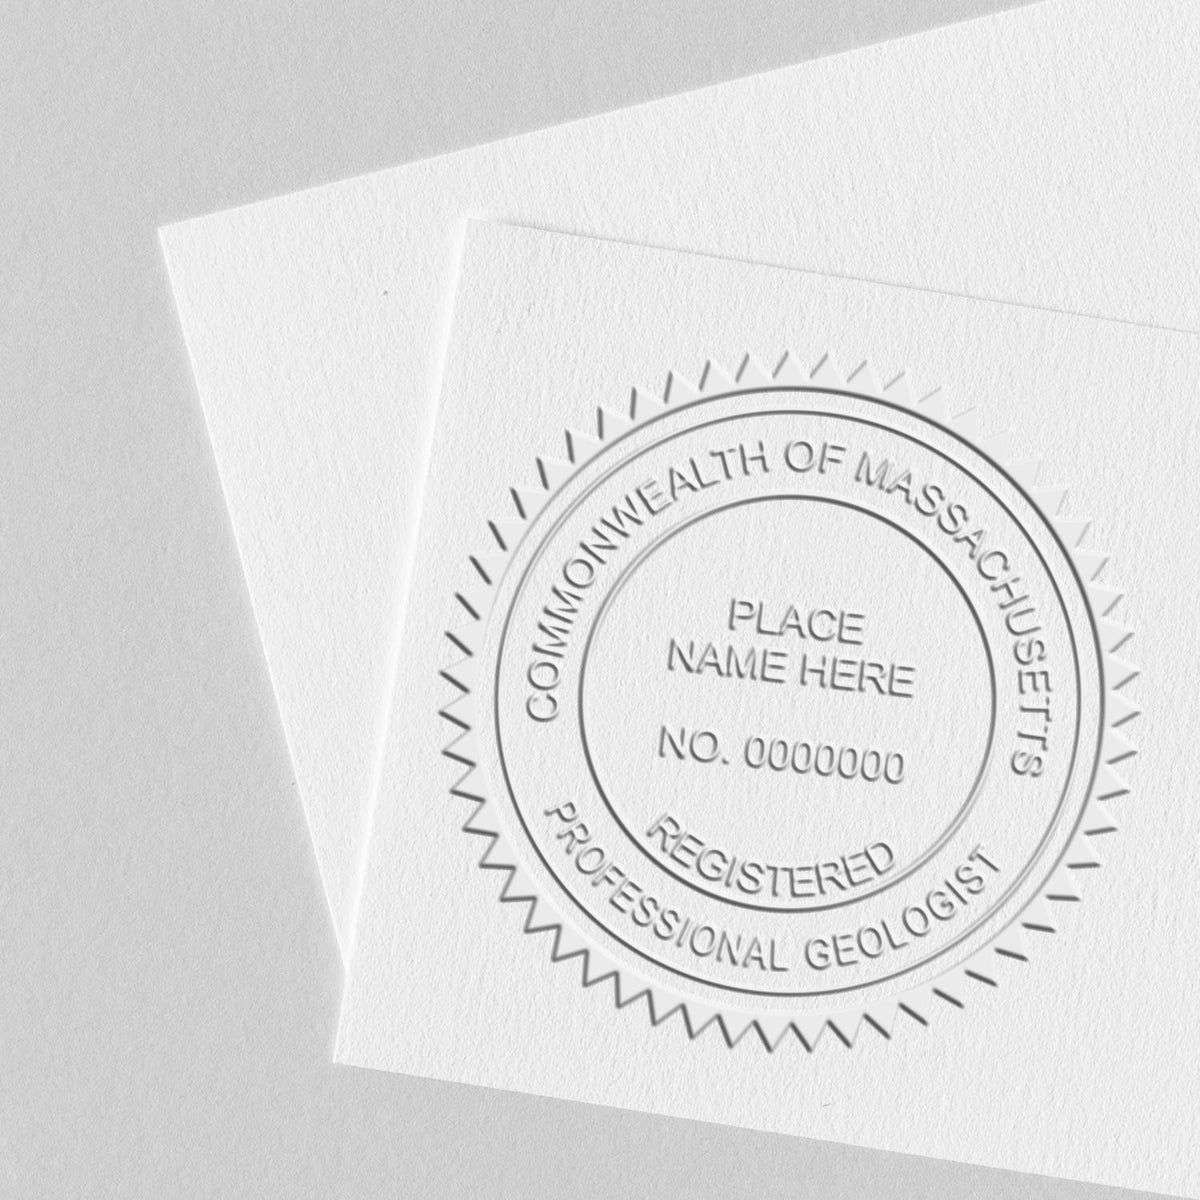 This paper is stamped with a sample imprint of the Long Reach Massachusetts Geology Seal, signifying its quality and reliability.